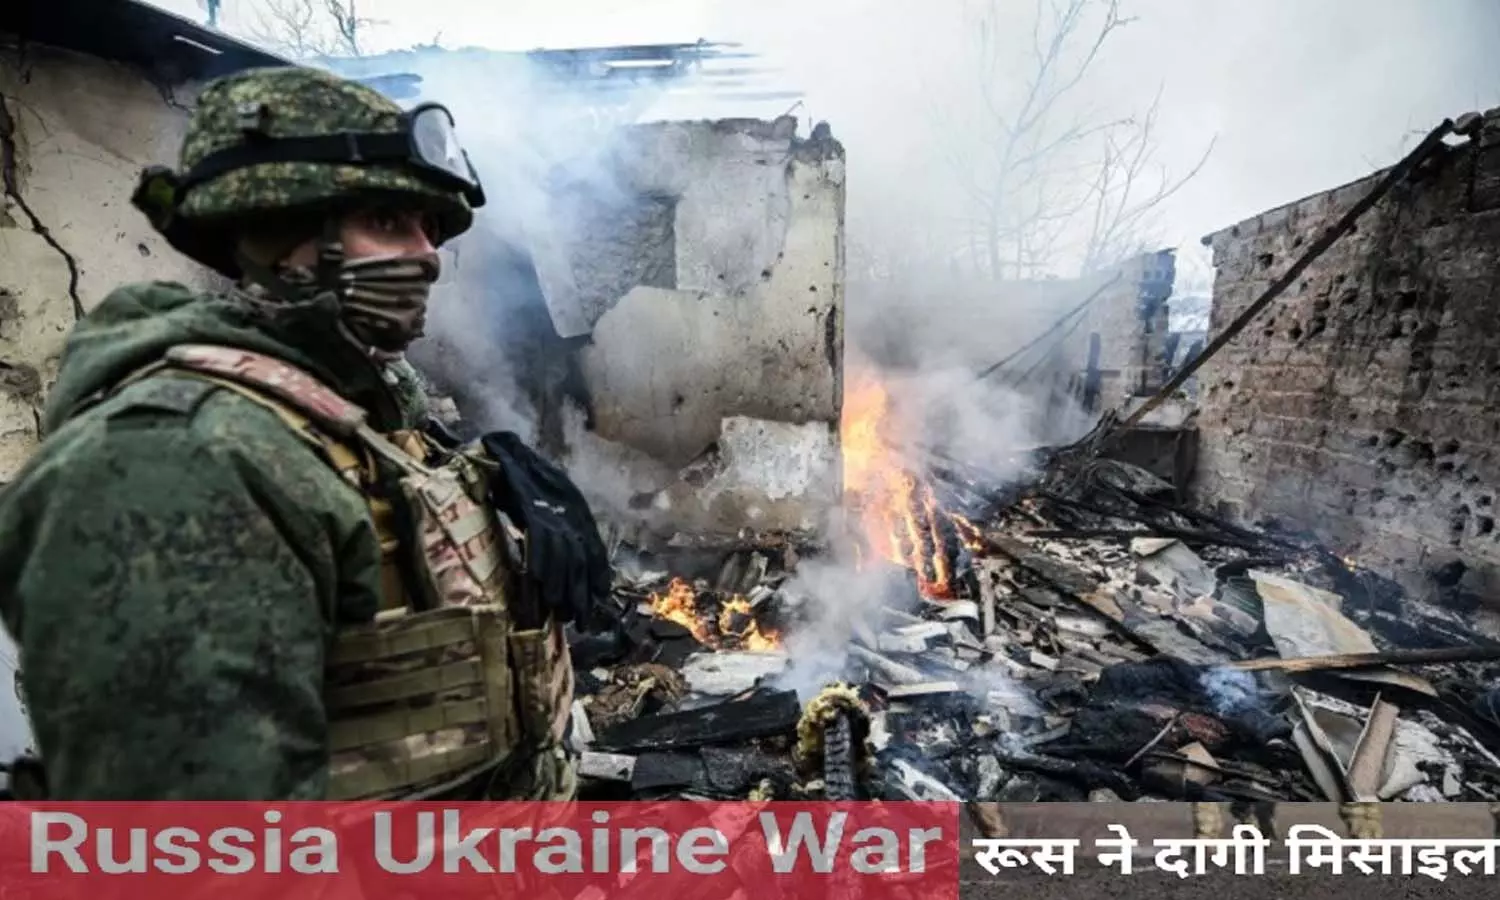 Russia-Ukraine War: Russia again fired missiles at Kharkiv, many feared dead